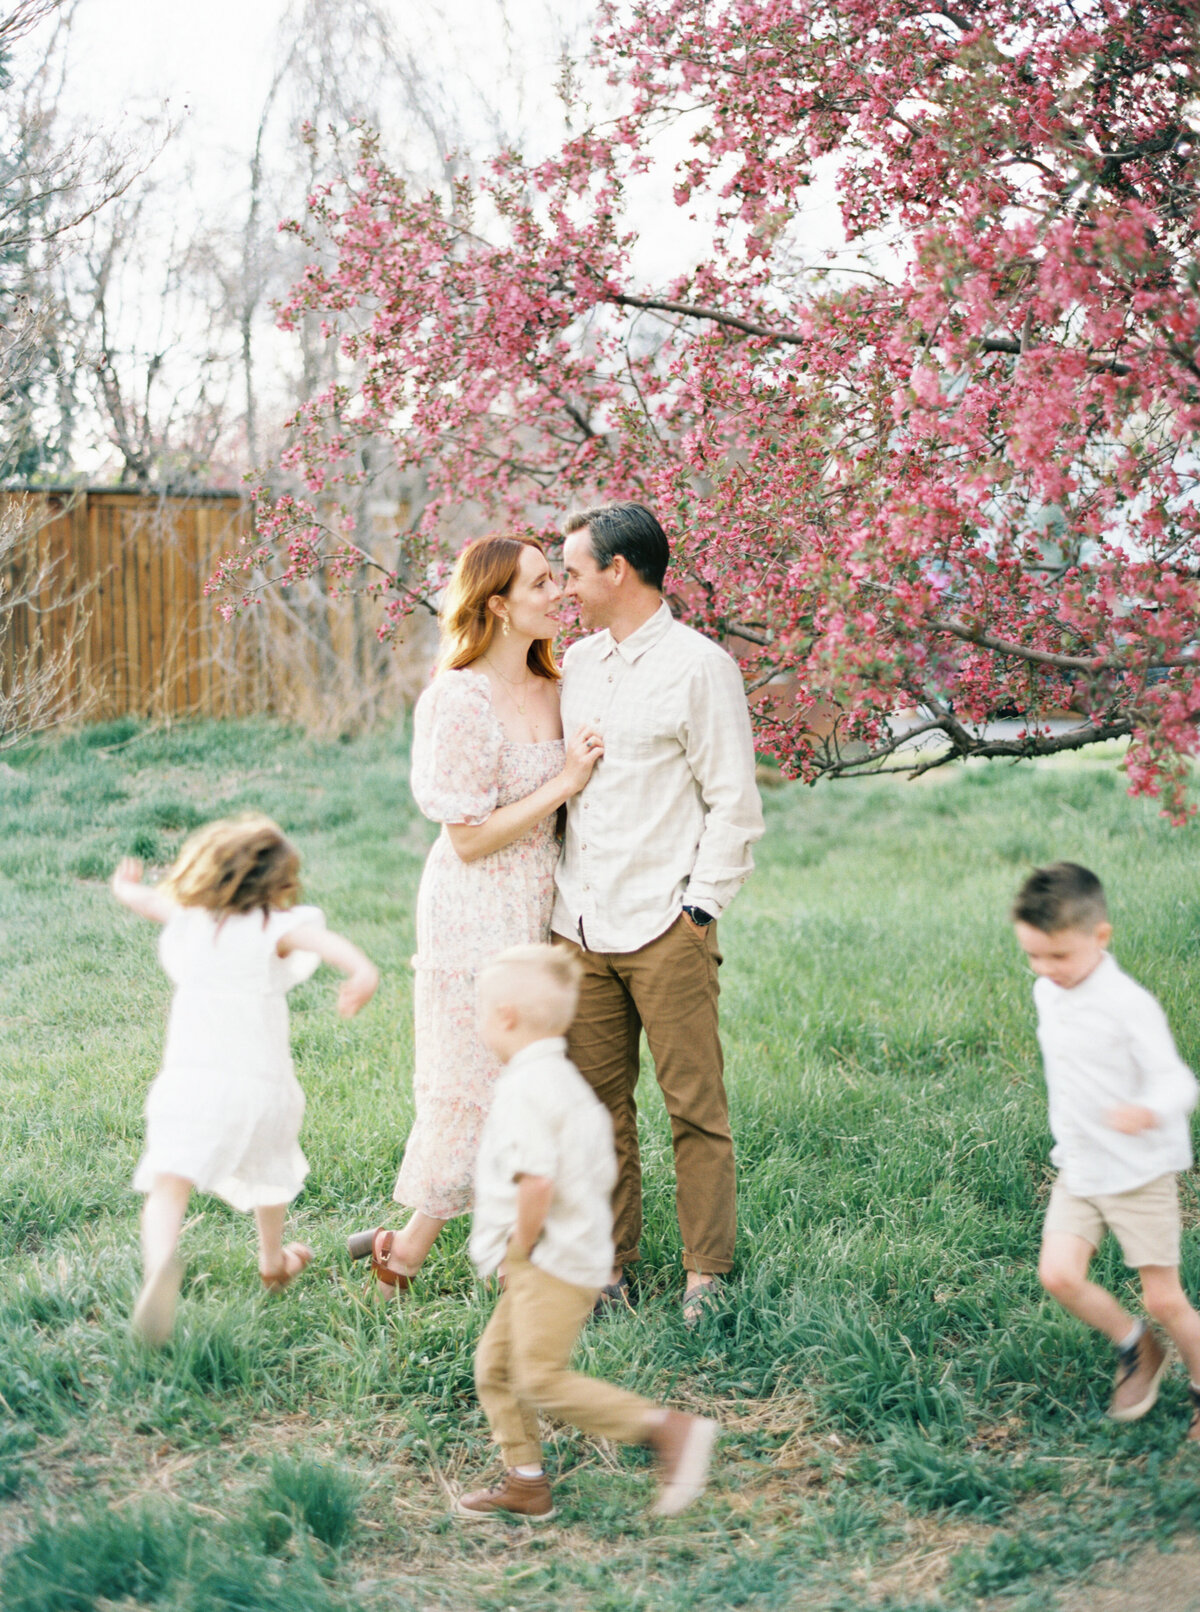 Family in field under blossoming trees.